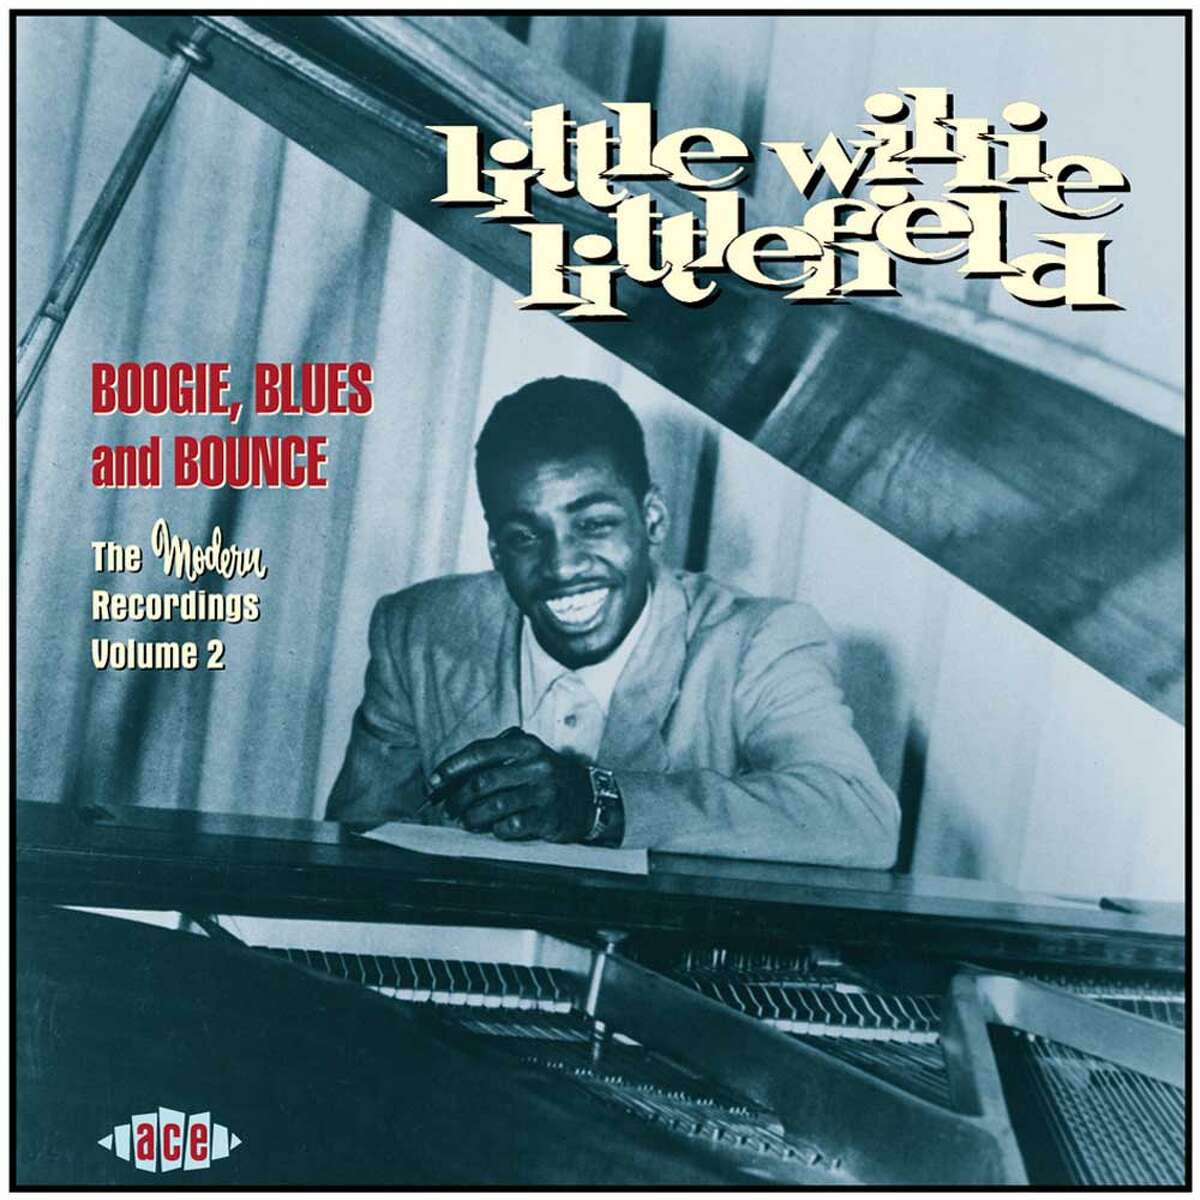 The boogie-woogie piano style of the late Houston musician Little Willie is captured in "Boogie, Blues and Bounce."